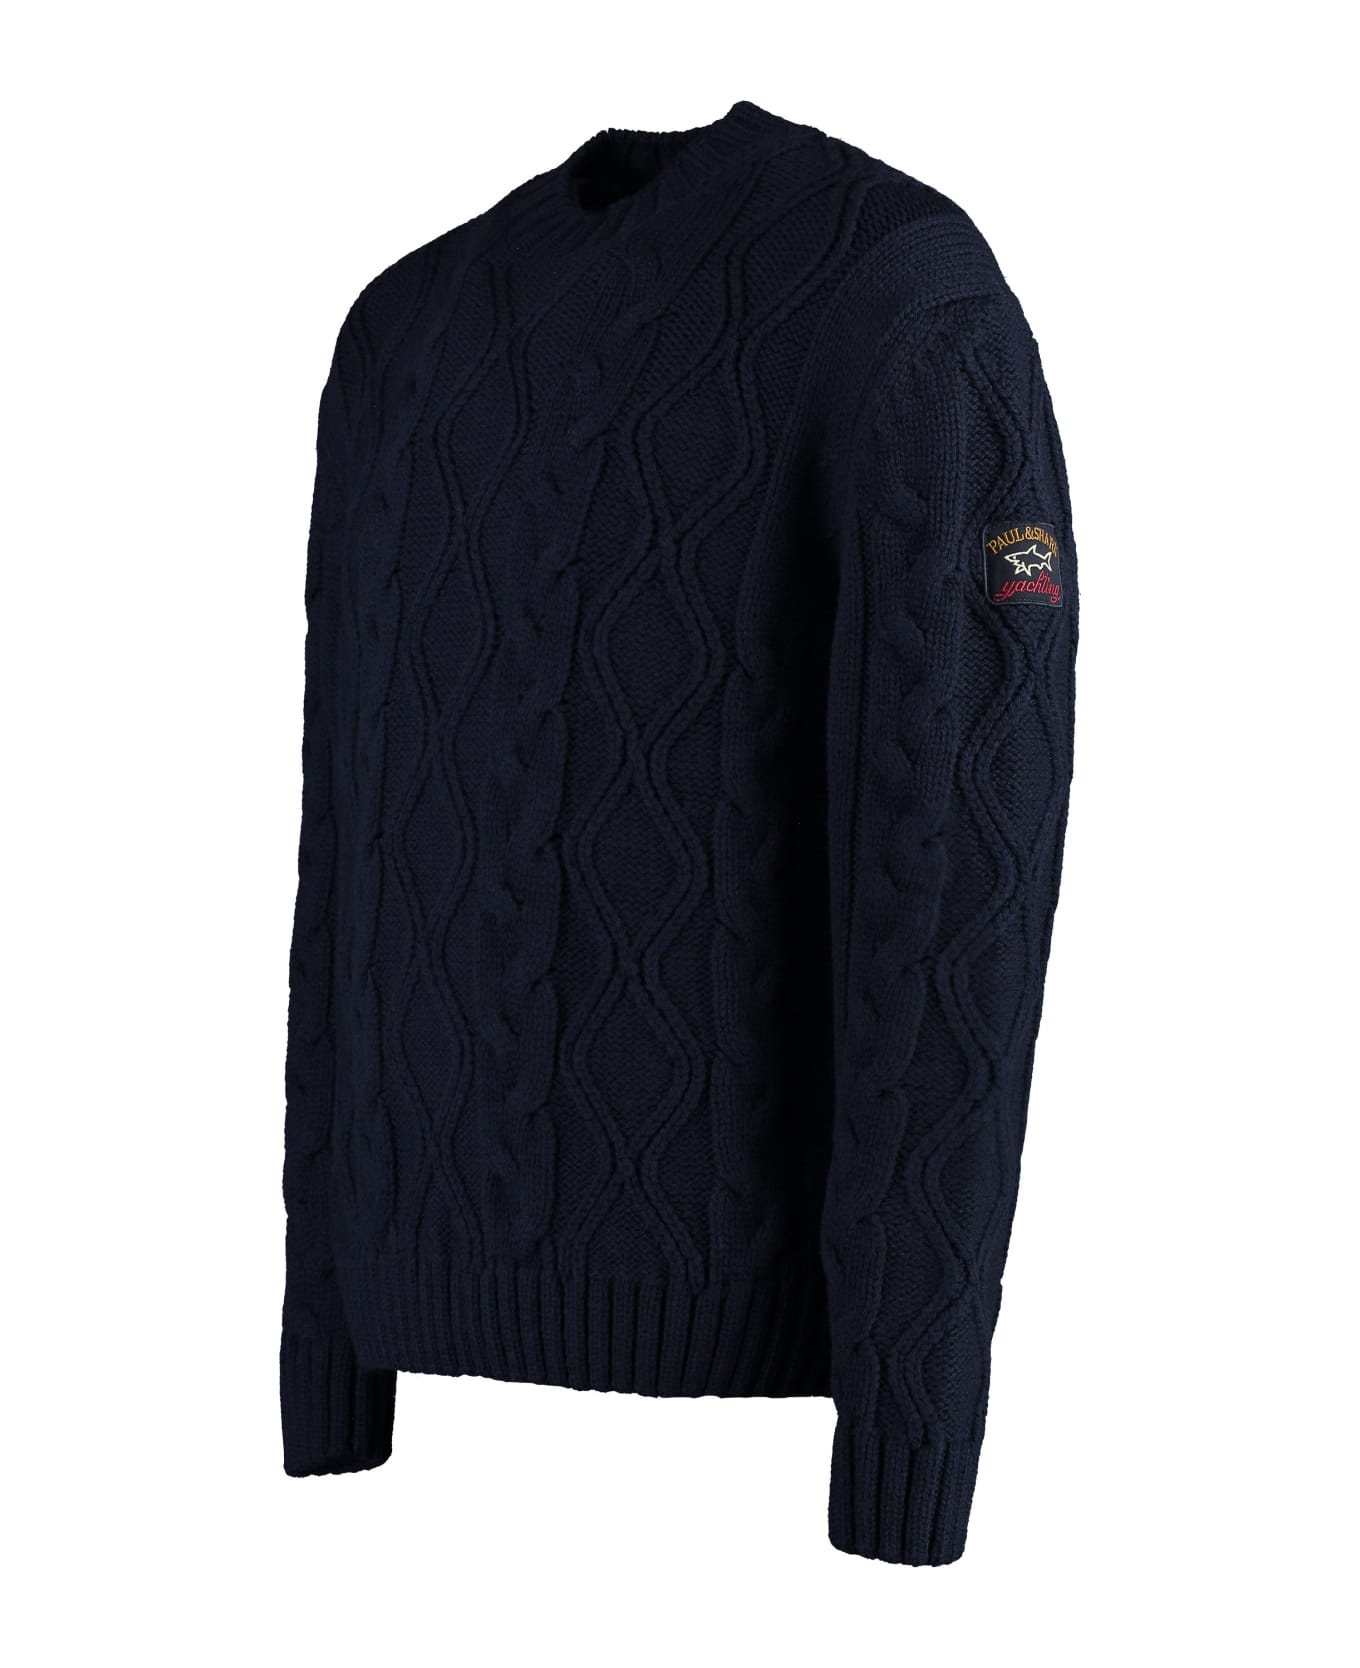 Paul&Shark Cable Knit Sweater - blue